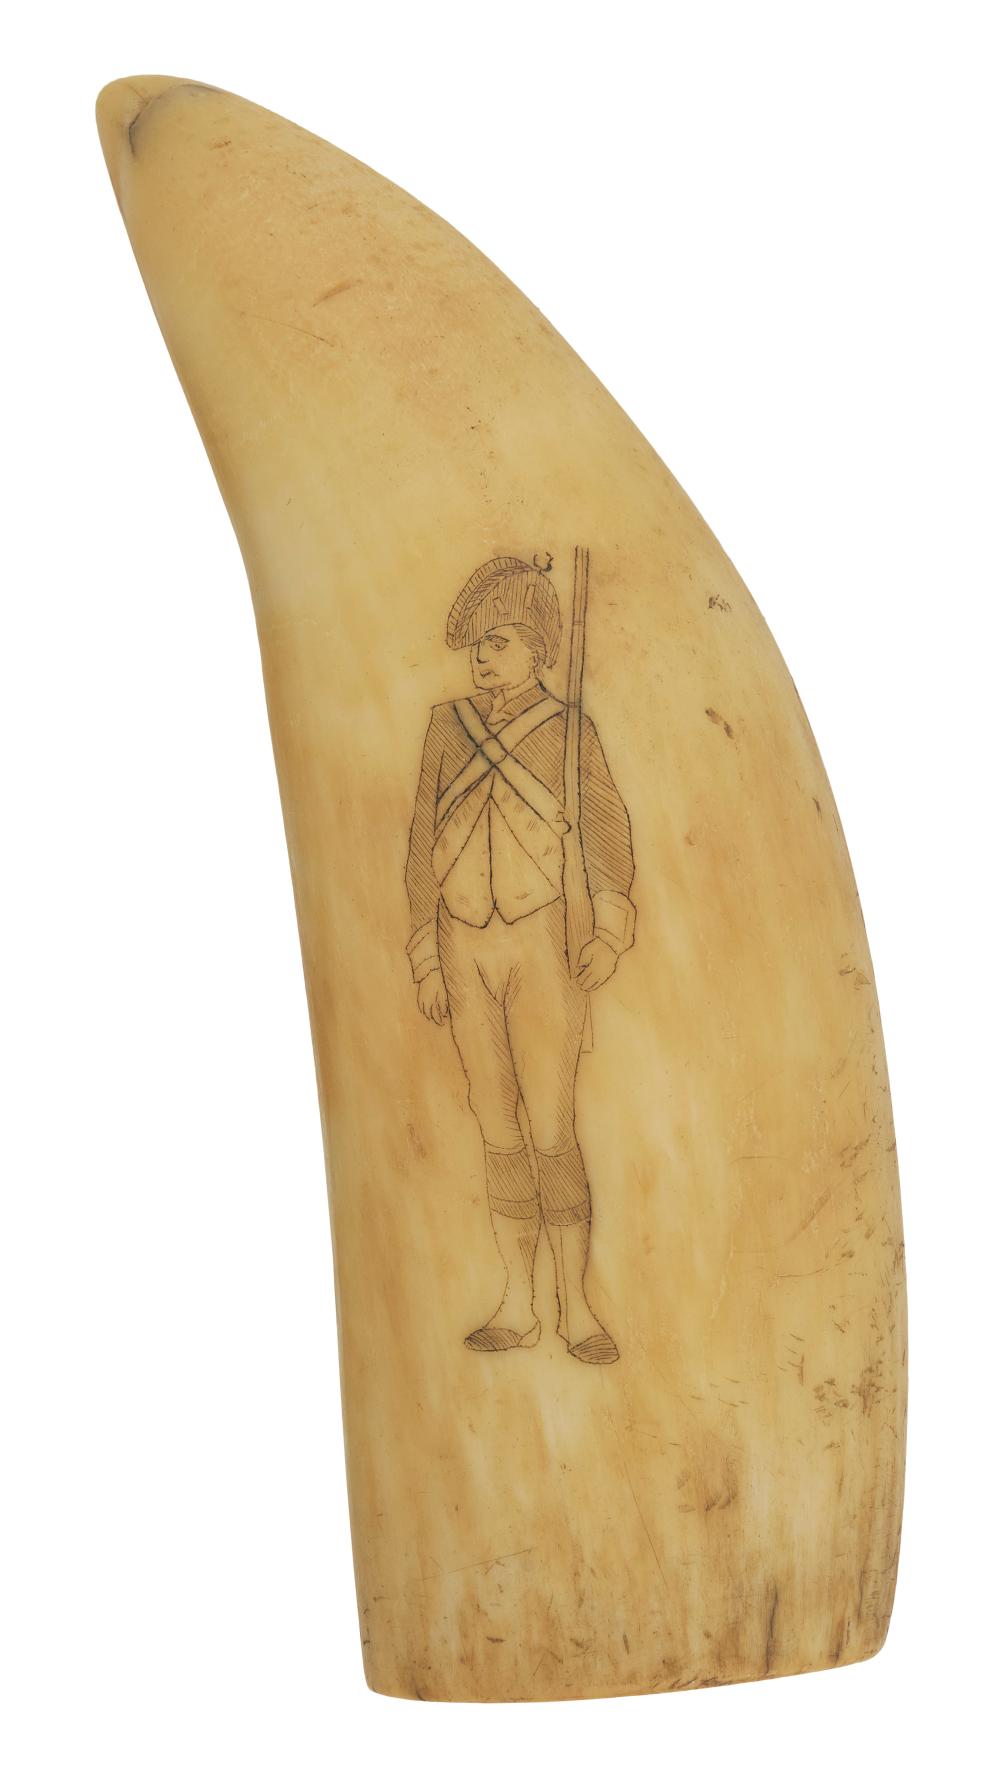 SCRIMSHAW WHALE S TOOTH DEPICTING 3501f2